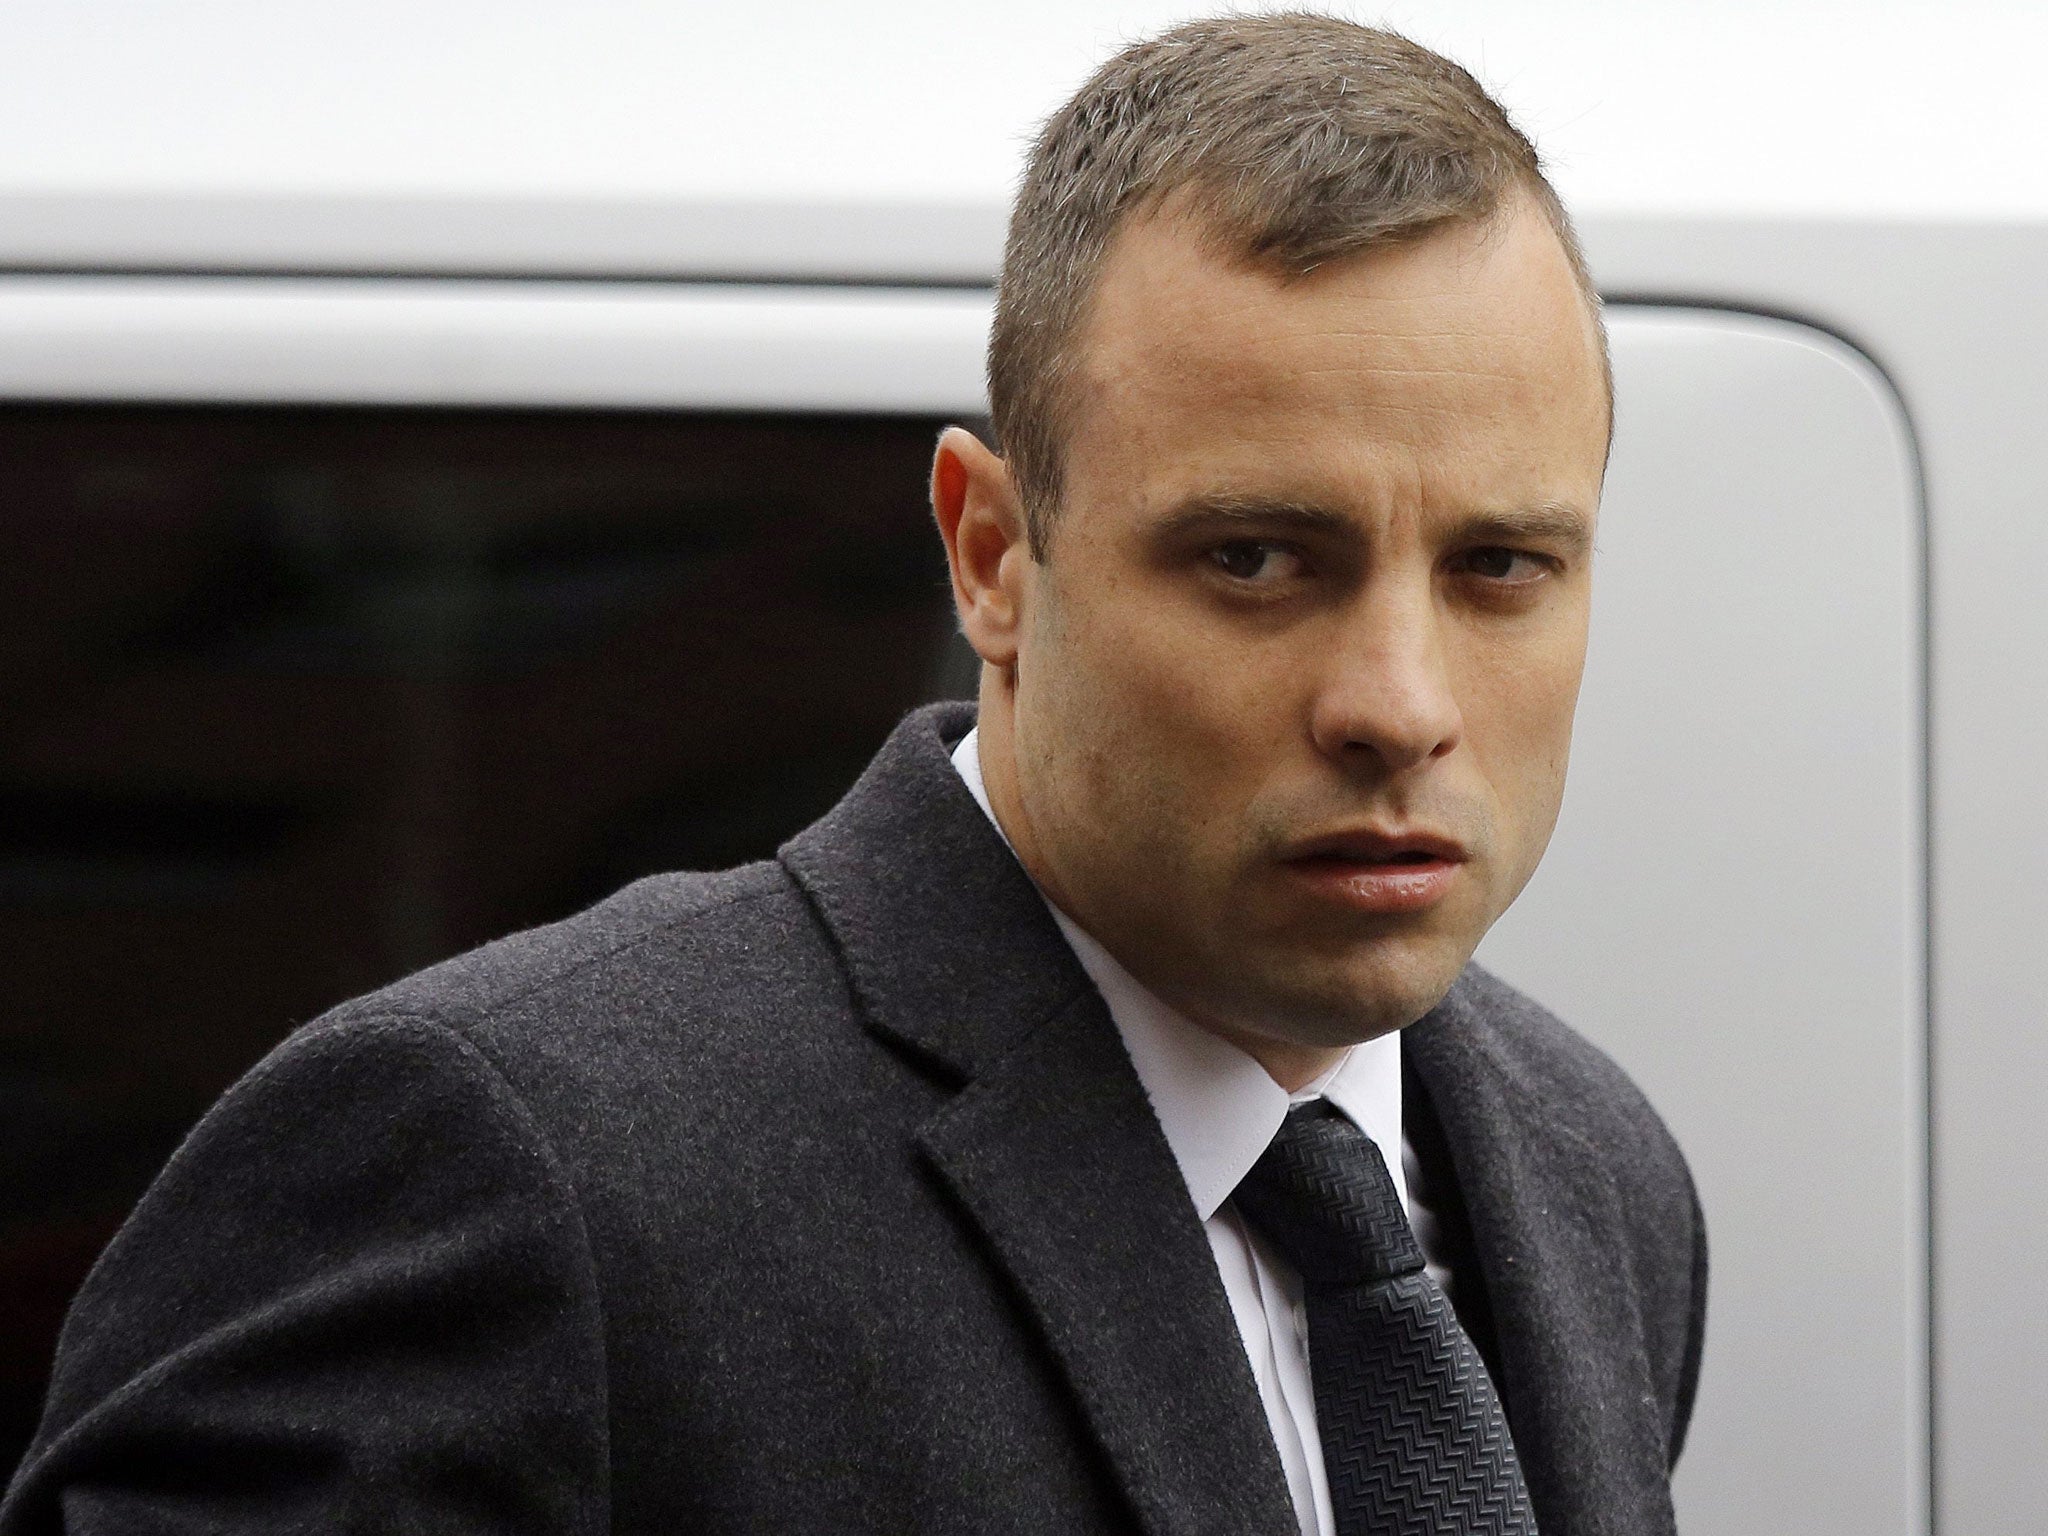 Oscar Pistorius arrives at court prior to another day of cross examination during his ongoing murder trial in Pretoria